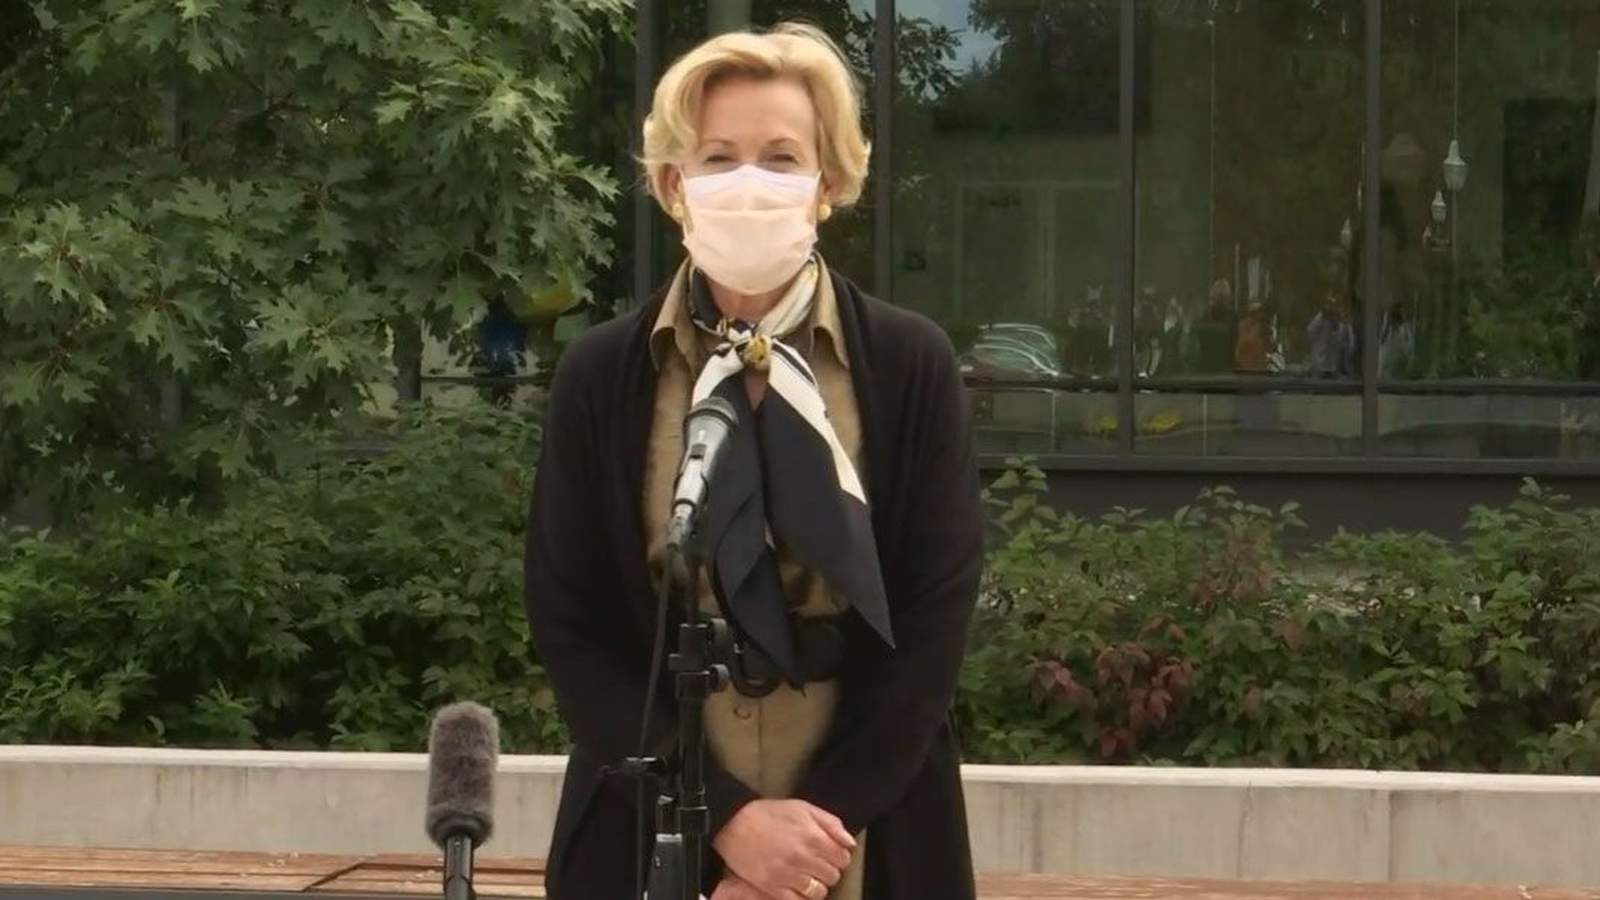 WATCH: Dr. Deborah Birx talks with media after Virginia Tech roundtable discussion